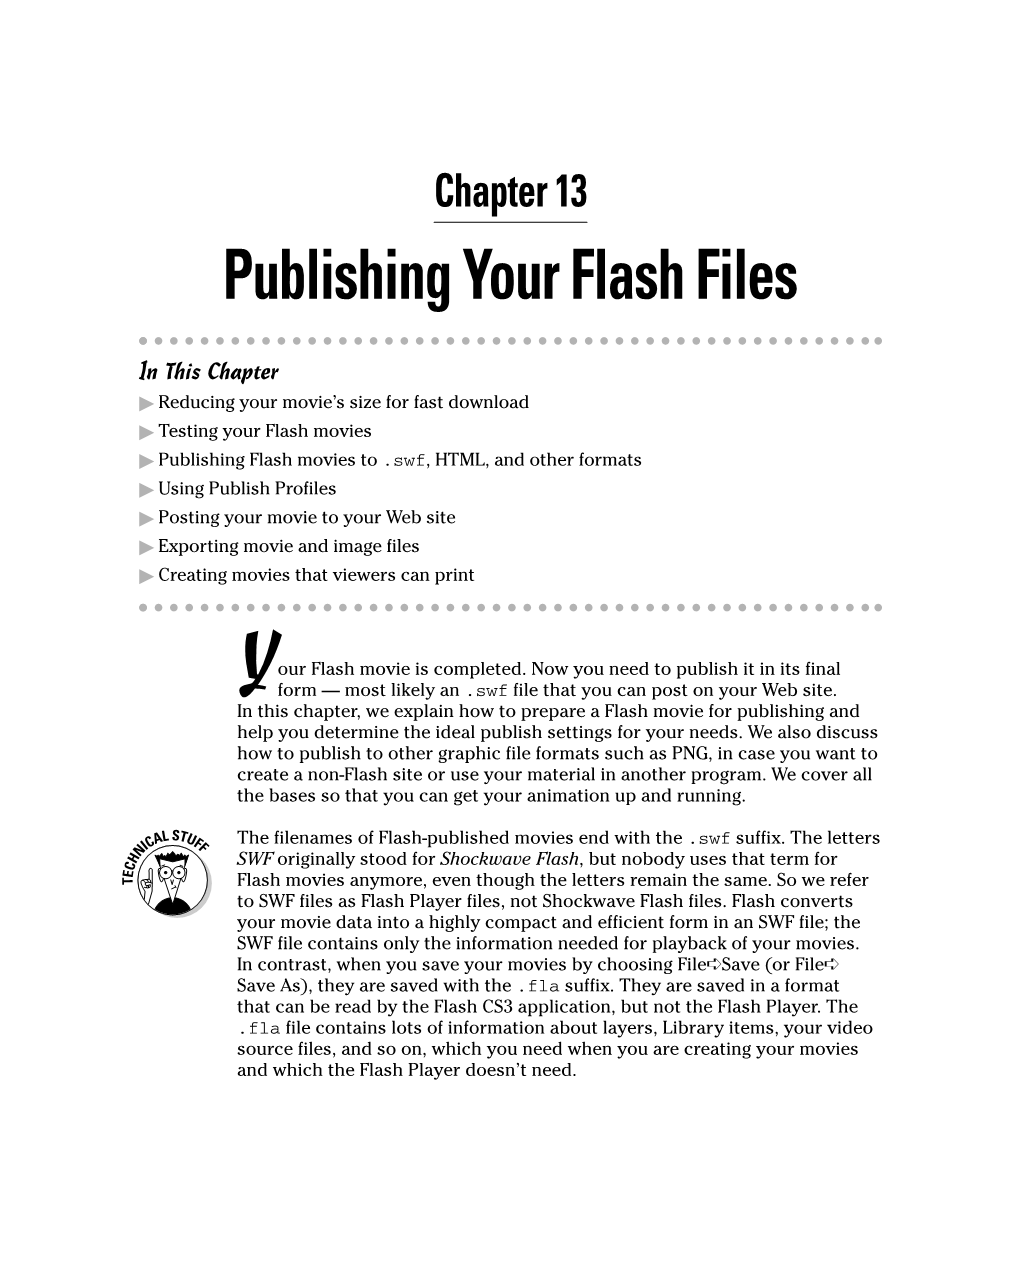 Chapter 13: Publishing Your Flash Files 279